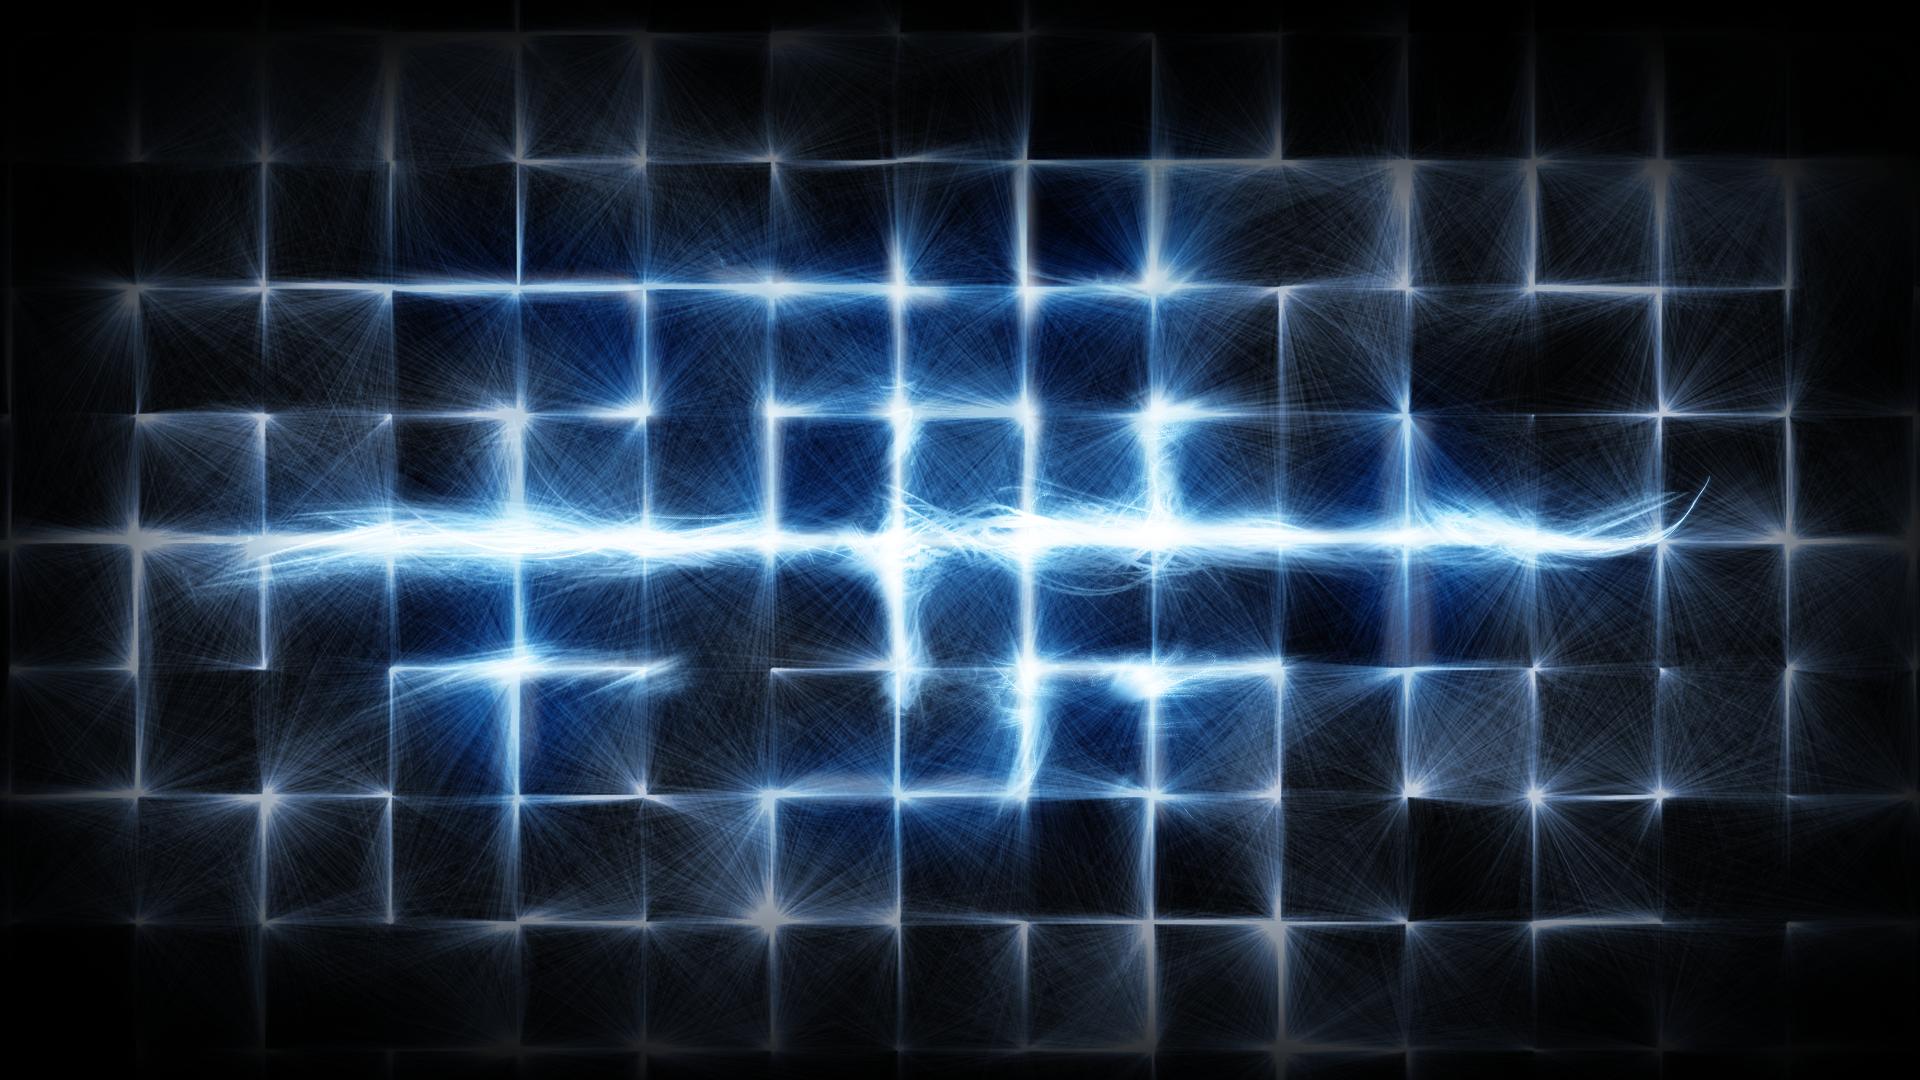 Wallpaper Abyss - HD Wallpapers, Background Images